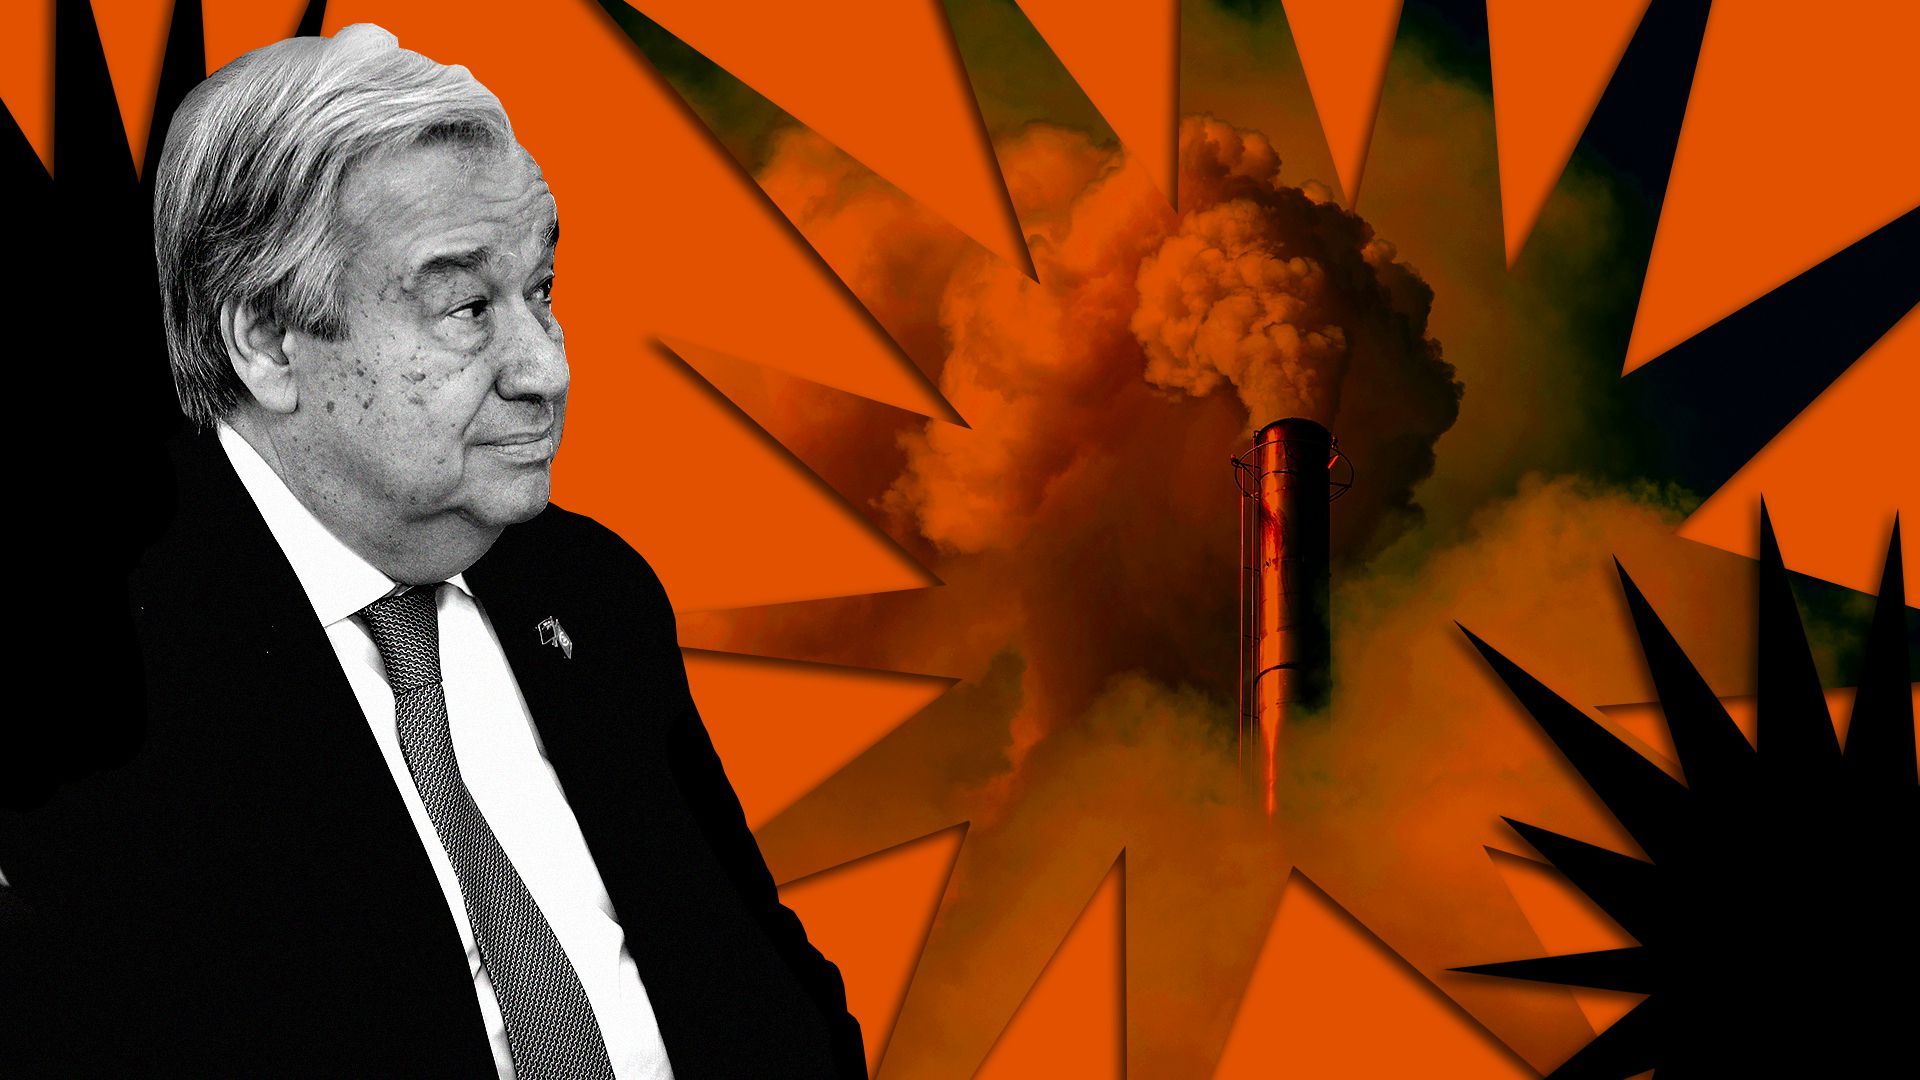 Photo illustration of Gen Guterres in front of bursting shapes, including one filled with images of greenhouse gas emissions